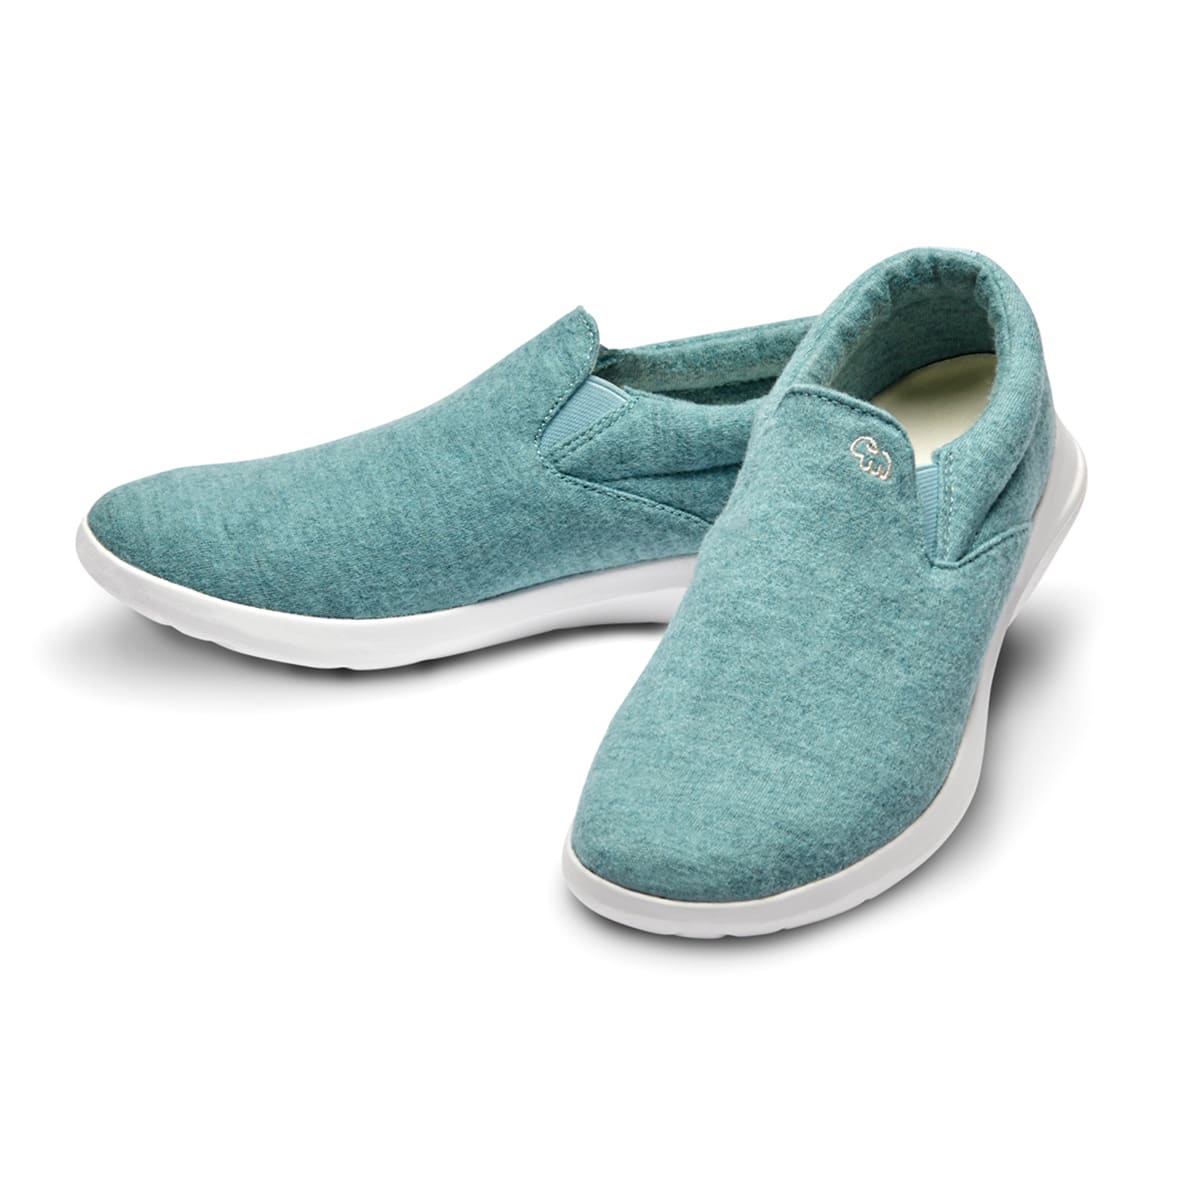 Chaussure femme turquoise